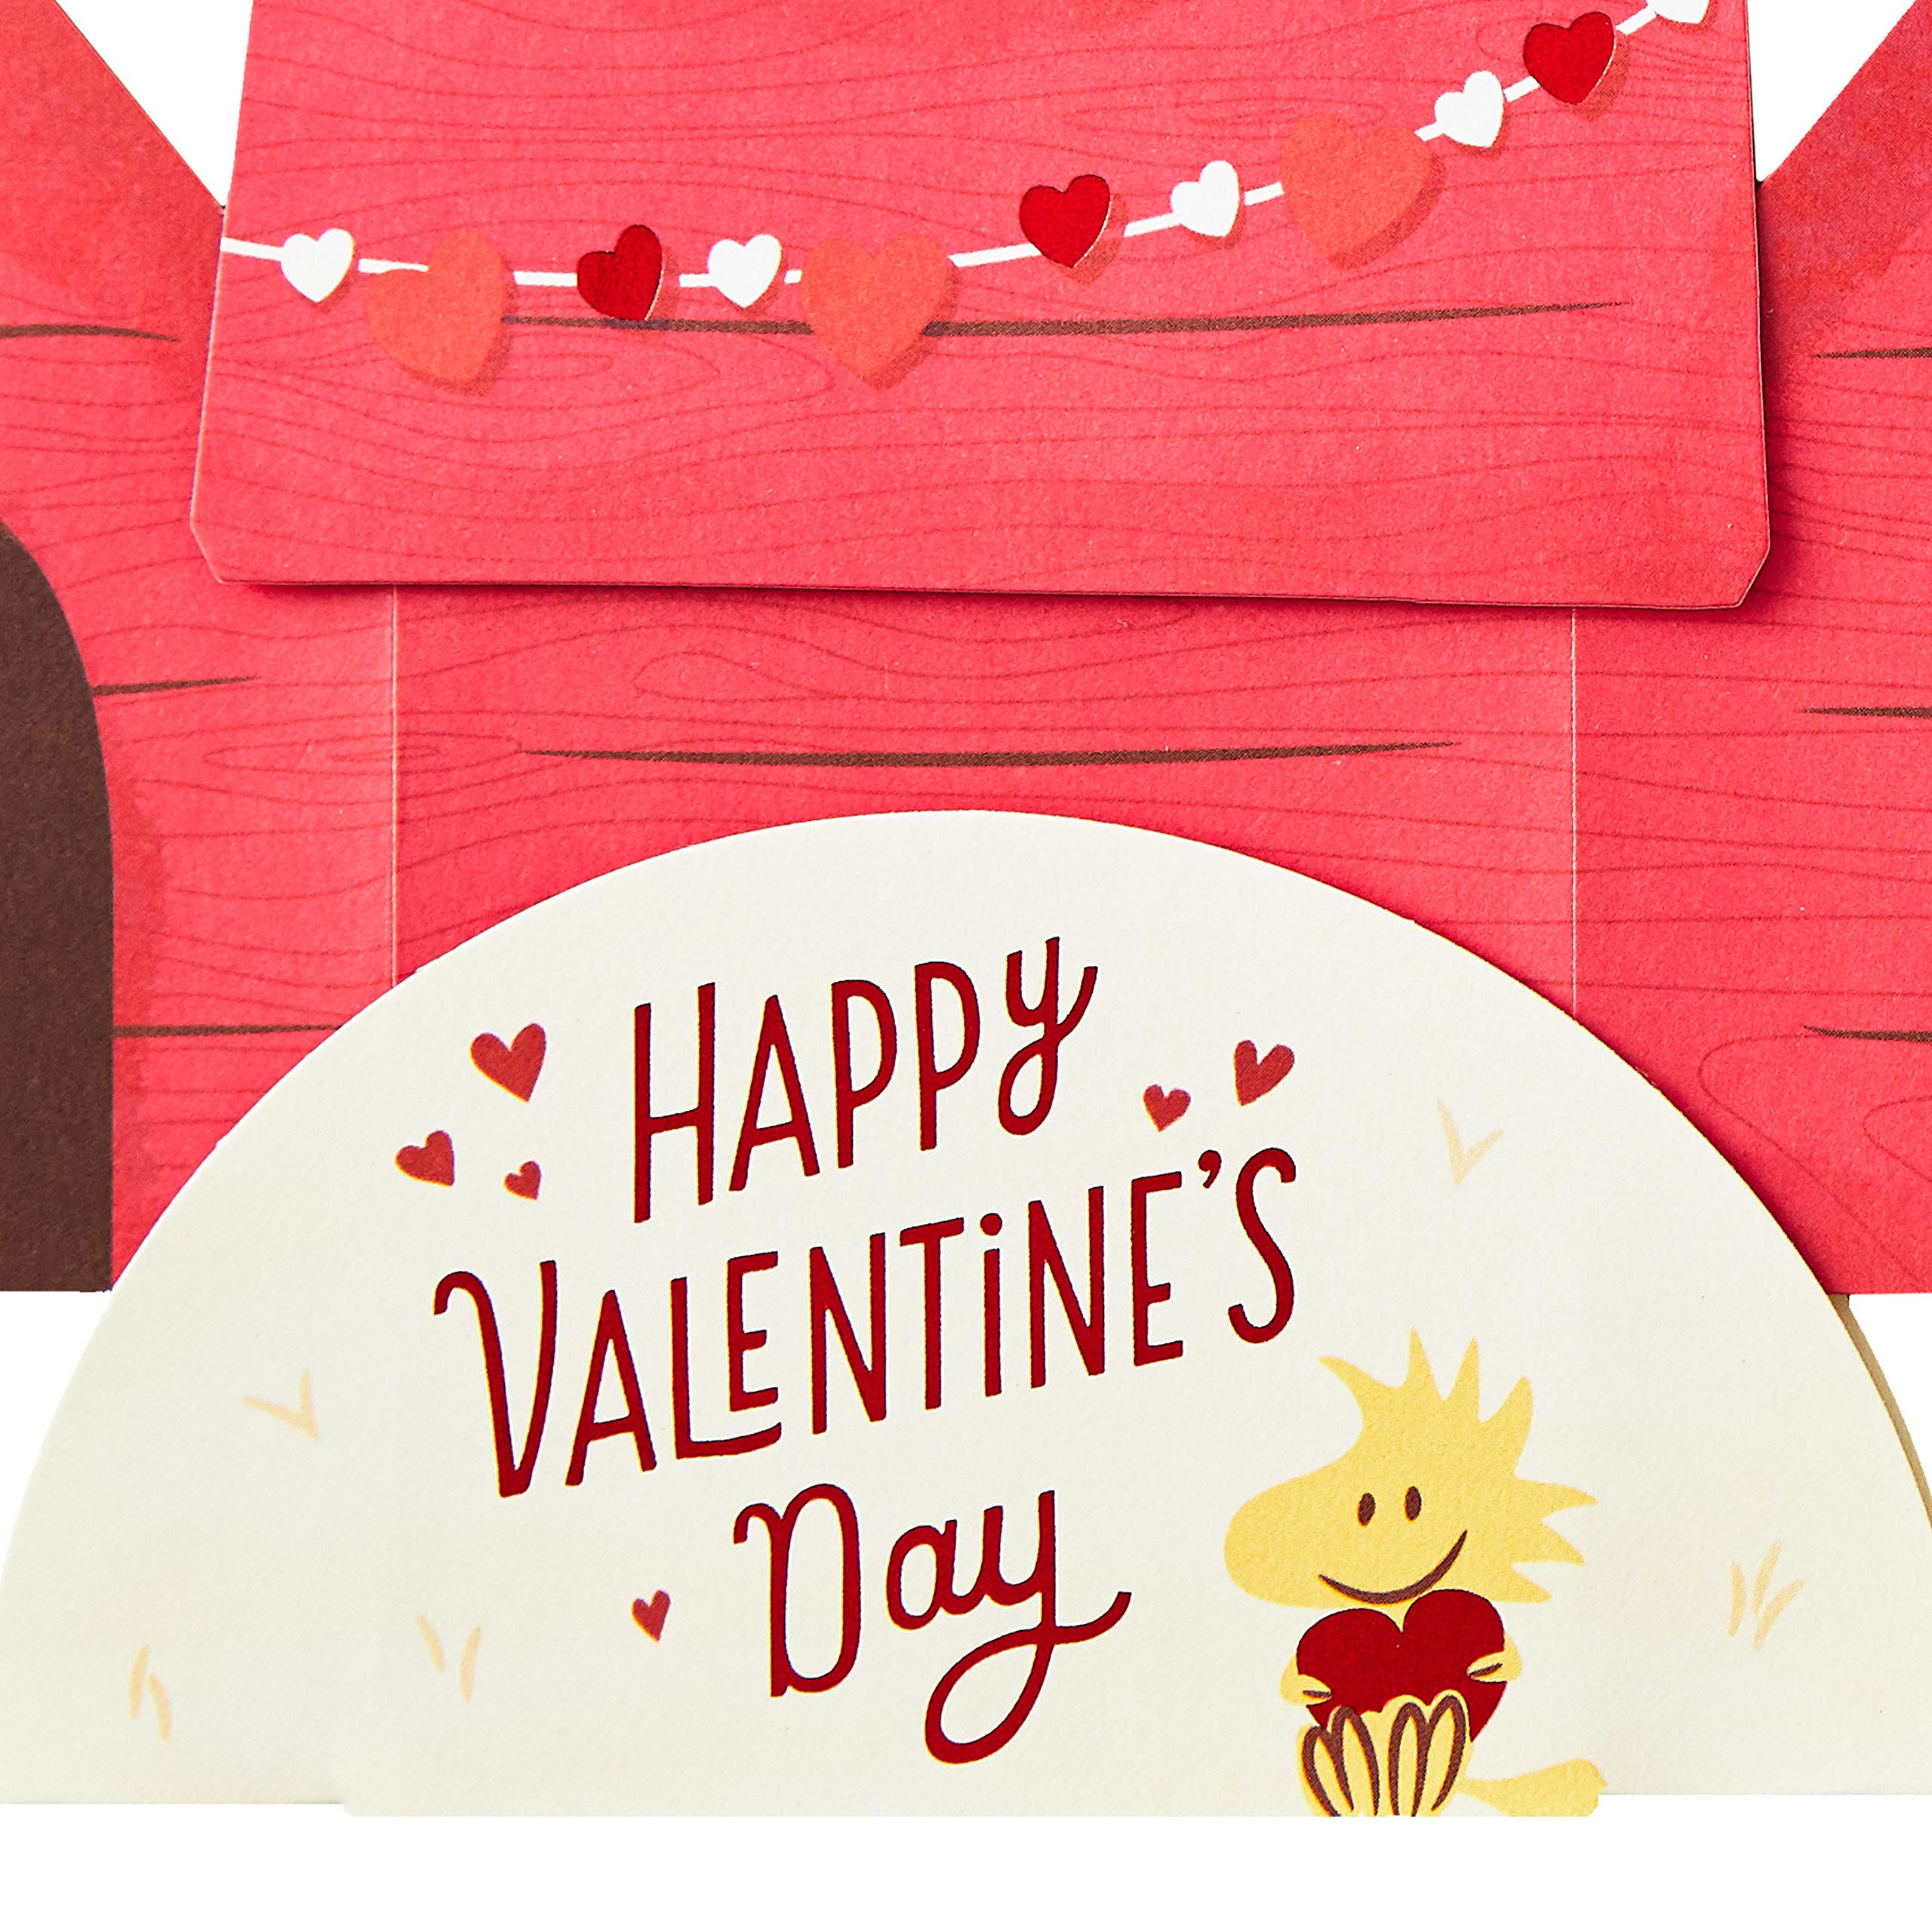 Hallmark Paper Wonder Peanuts Pop Up Valentines Day Card (Snoopy and Woodstock)